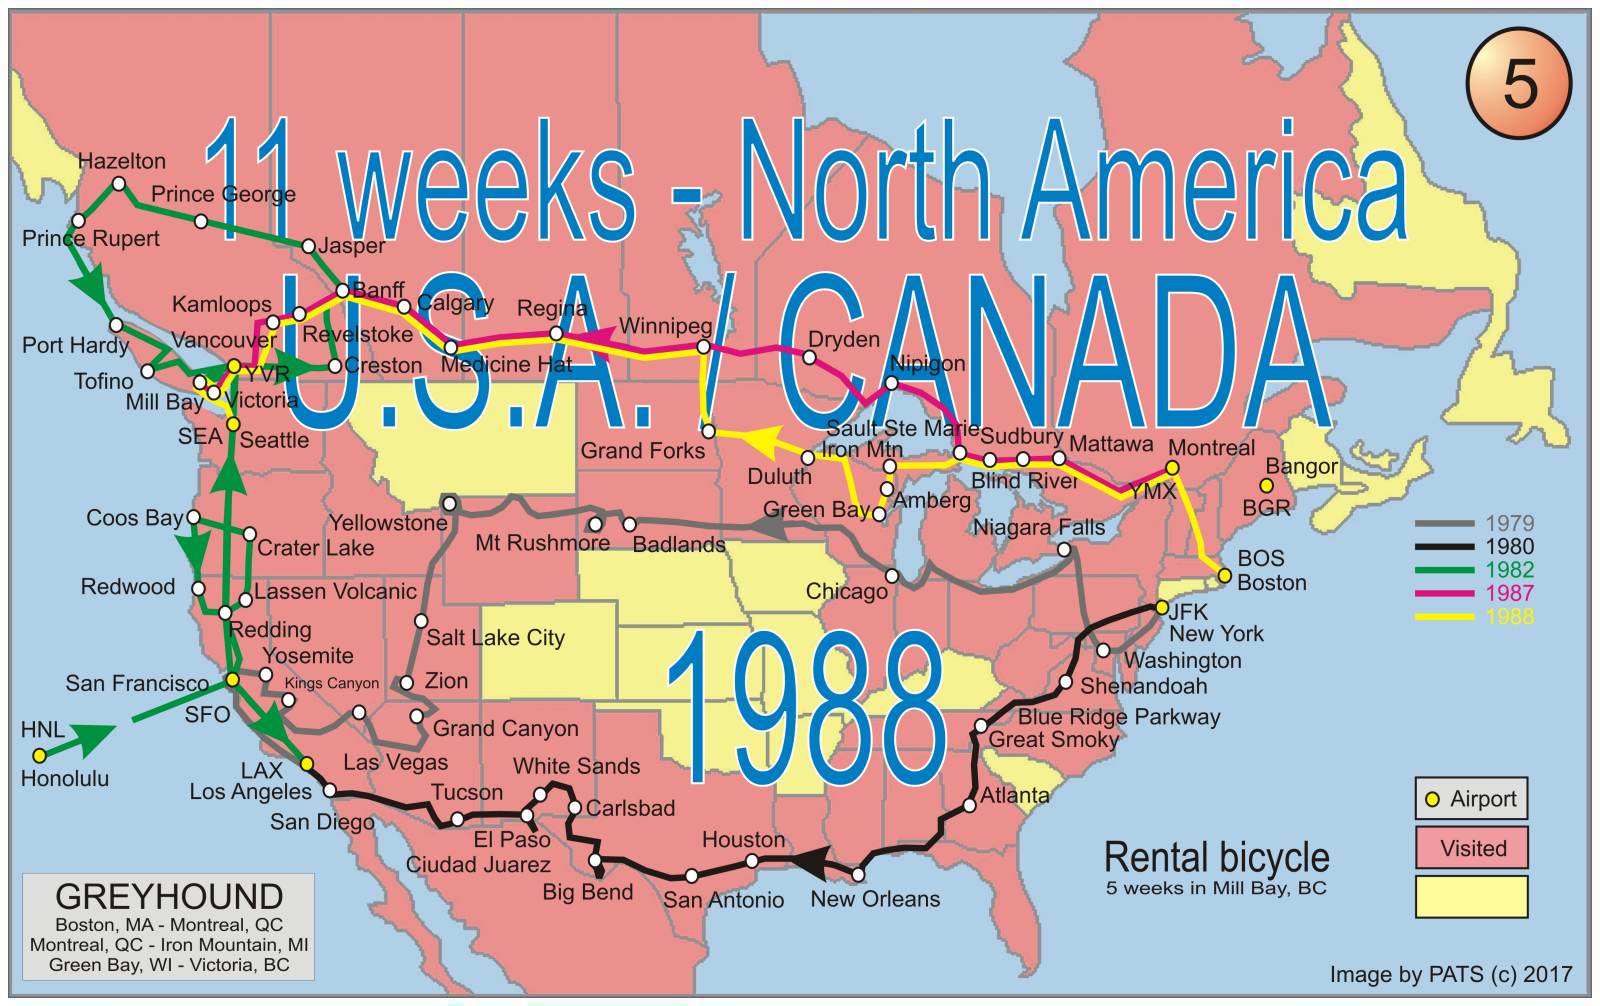 1988 - 11 weeks - across North-America to Vancouver Island